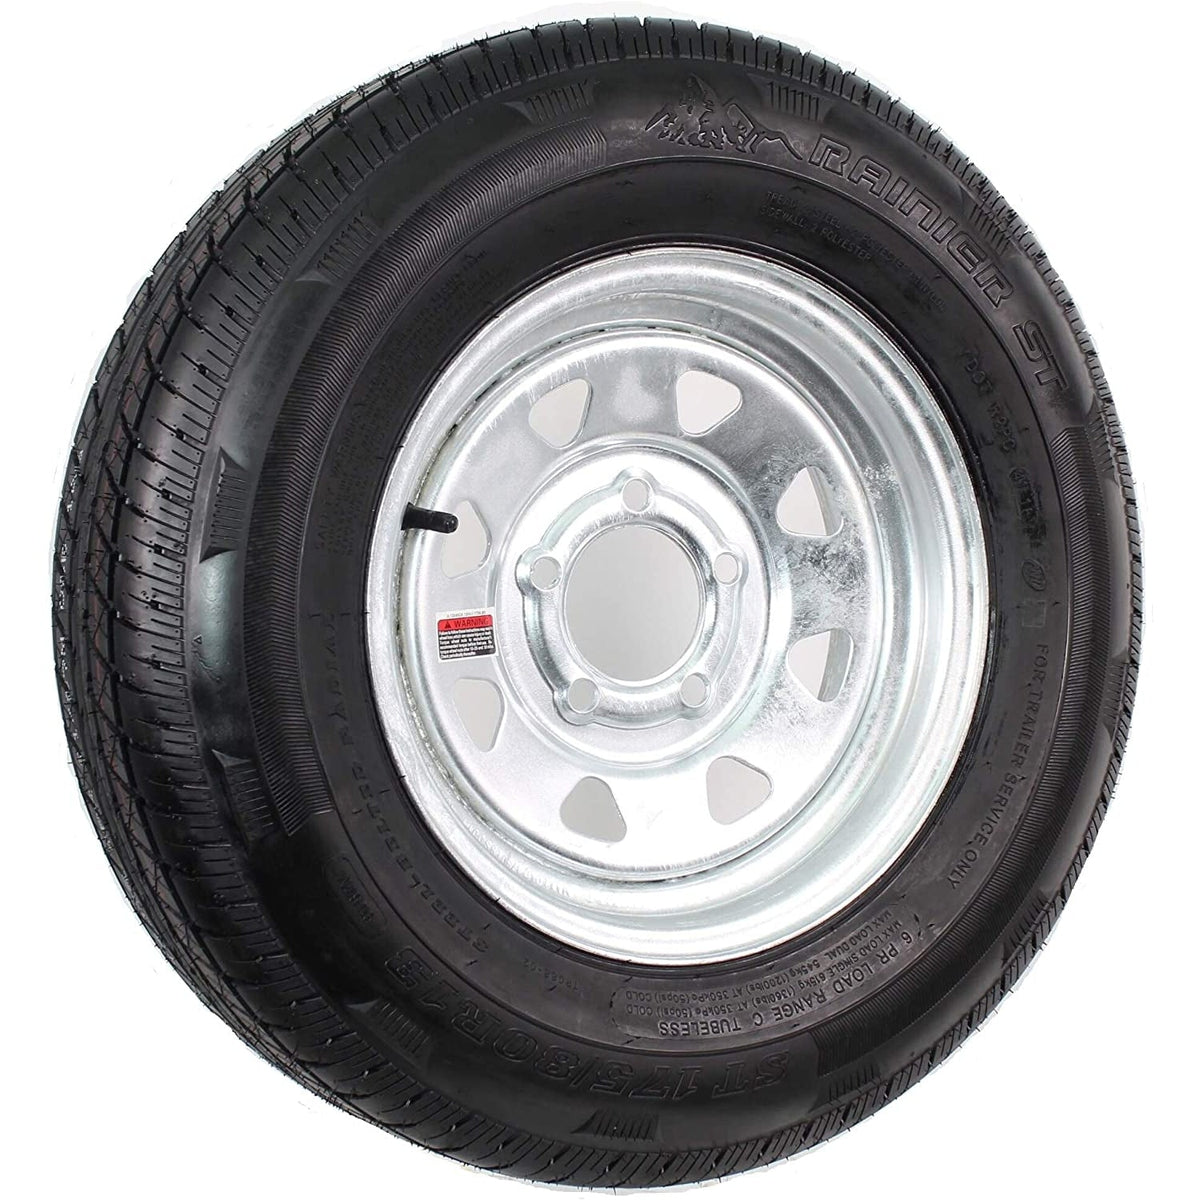 Tredit Tire & Wheel Qualifies for Free Shipping Tredit Tire & Wheel ST175/80R13 5-Lug Radial Tire/W #Y810120